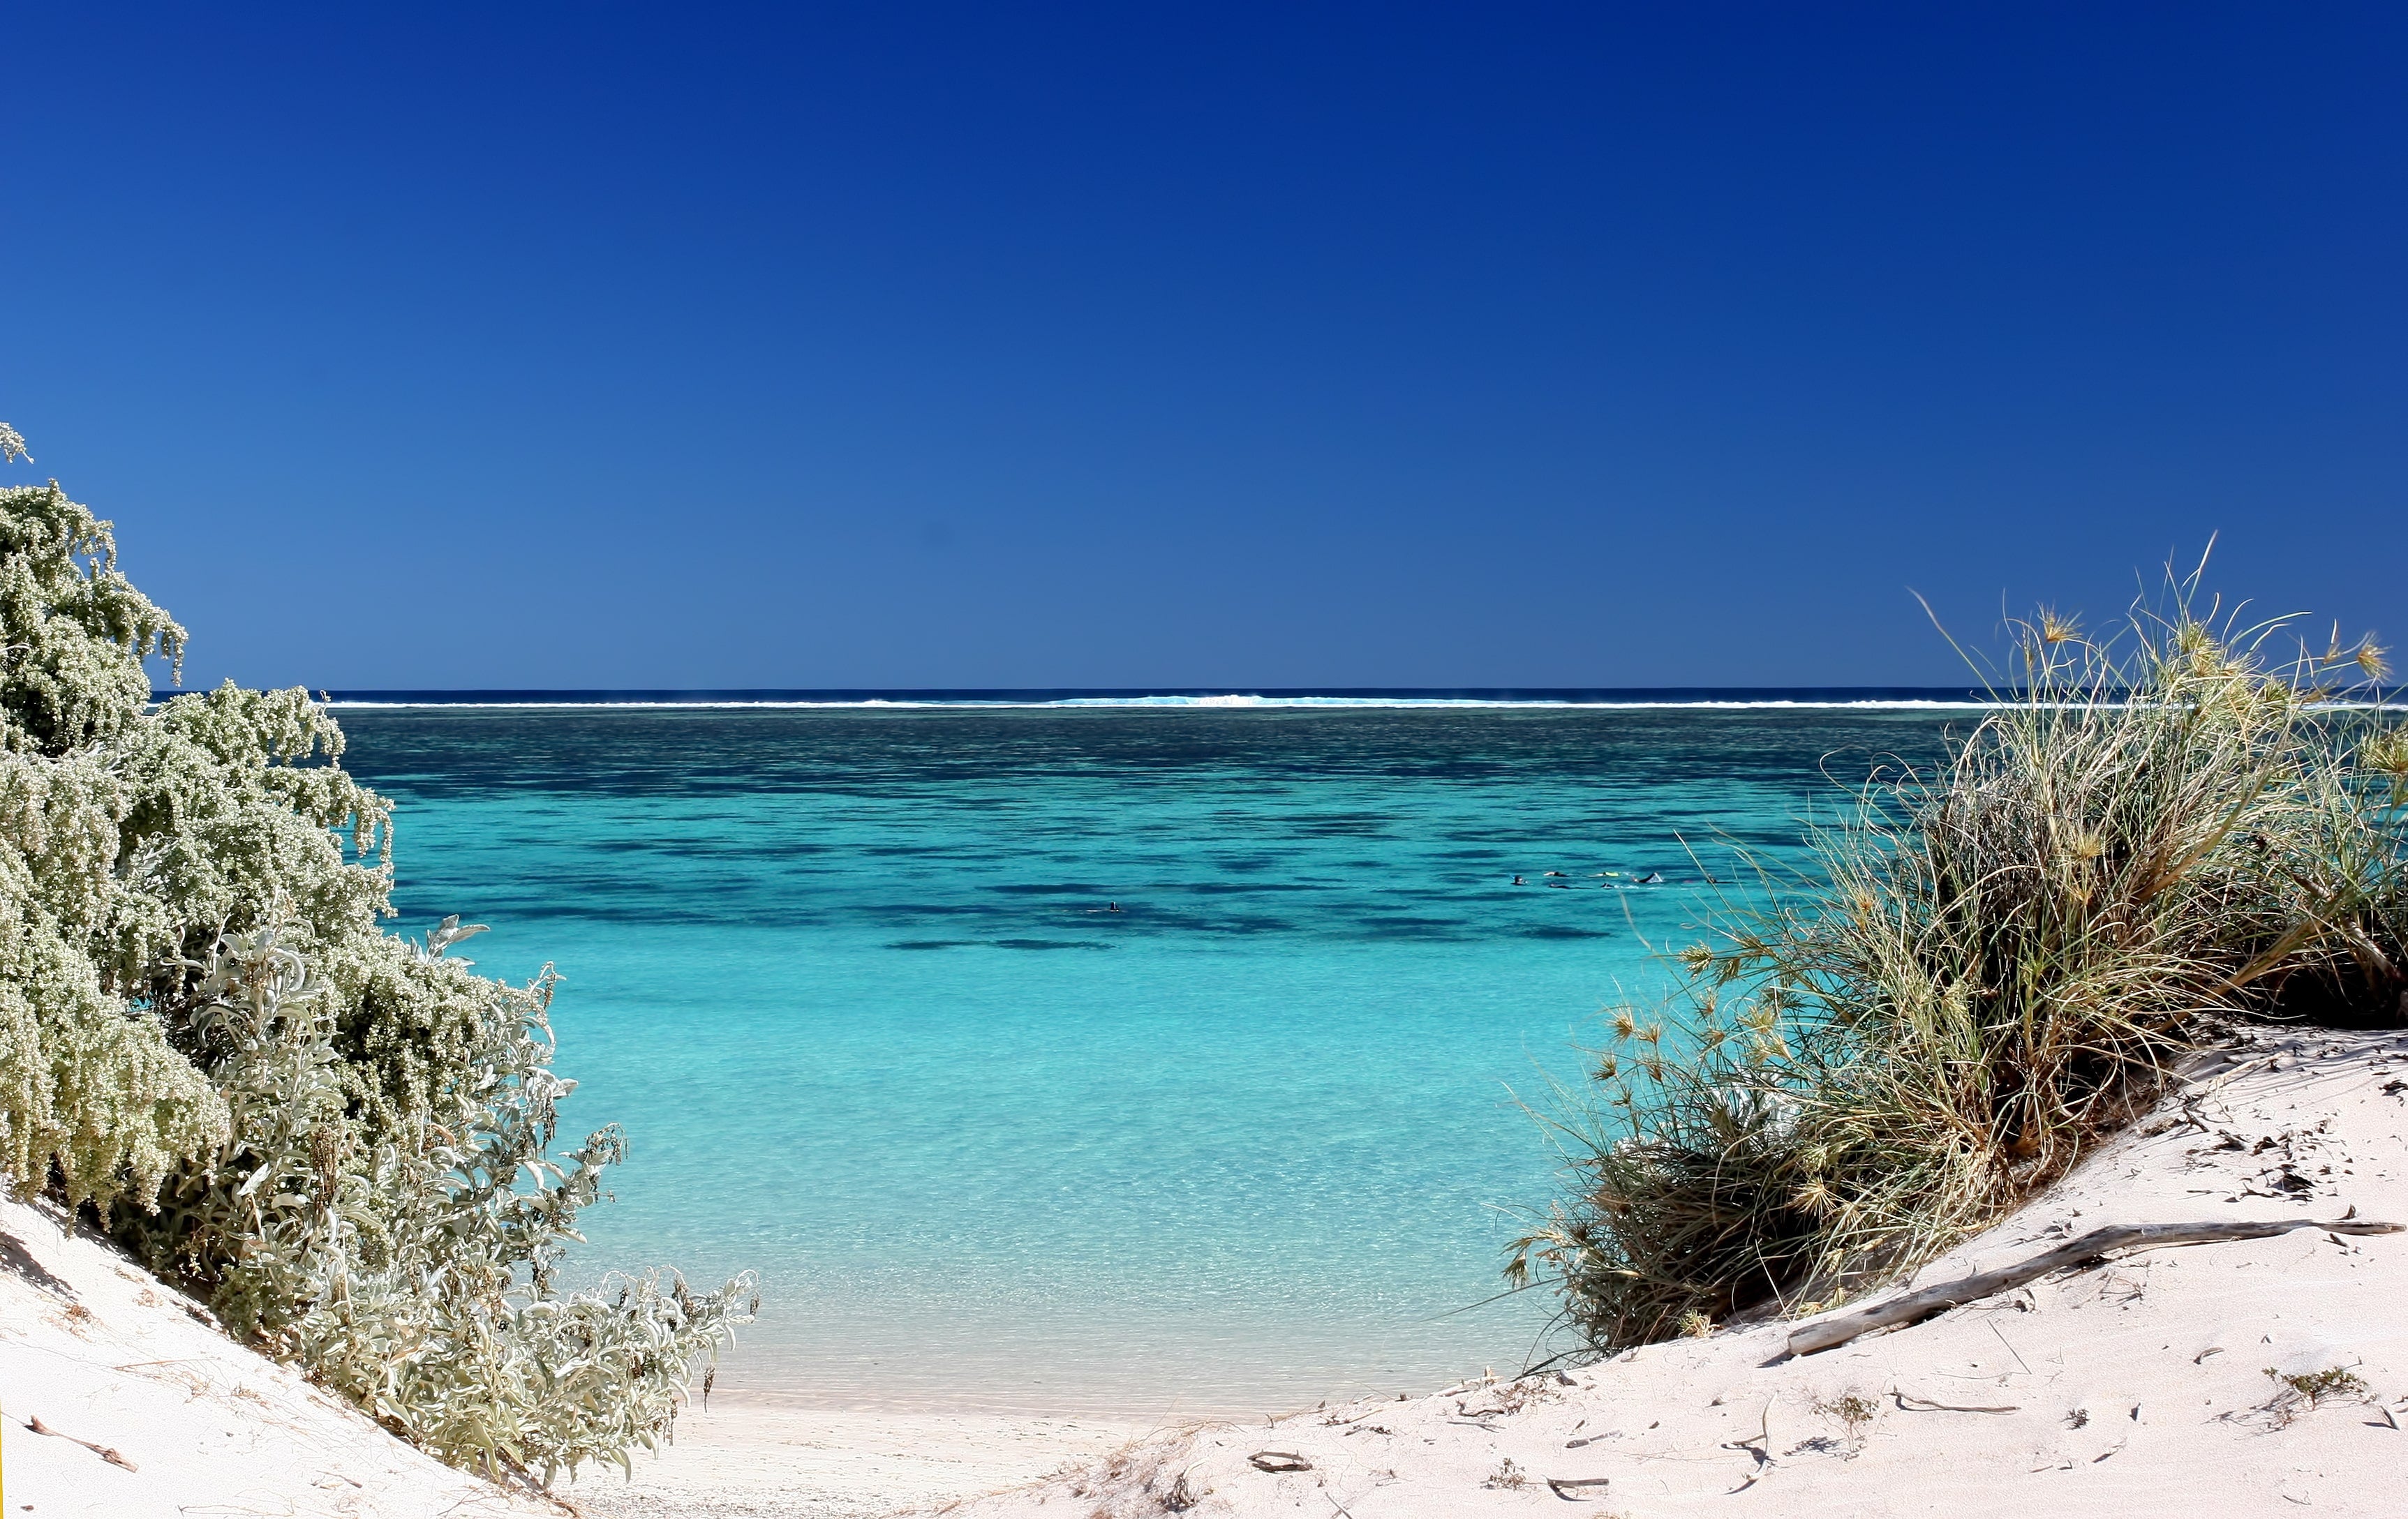 Ningaloo Reef is harder to get to than the Great Barrier Reef, but incredibly rewarding